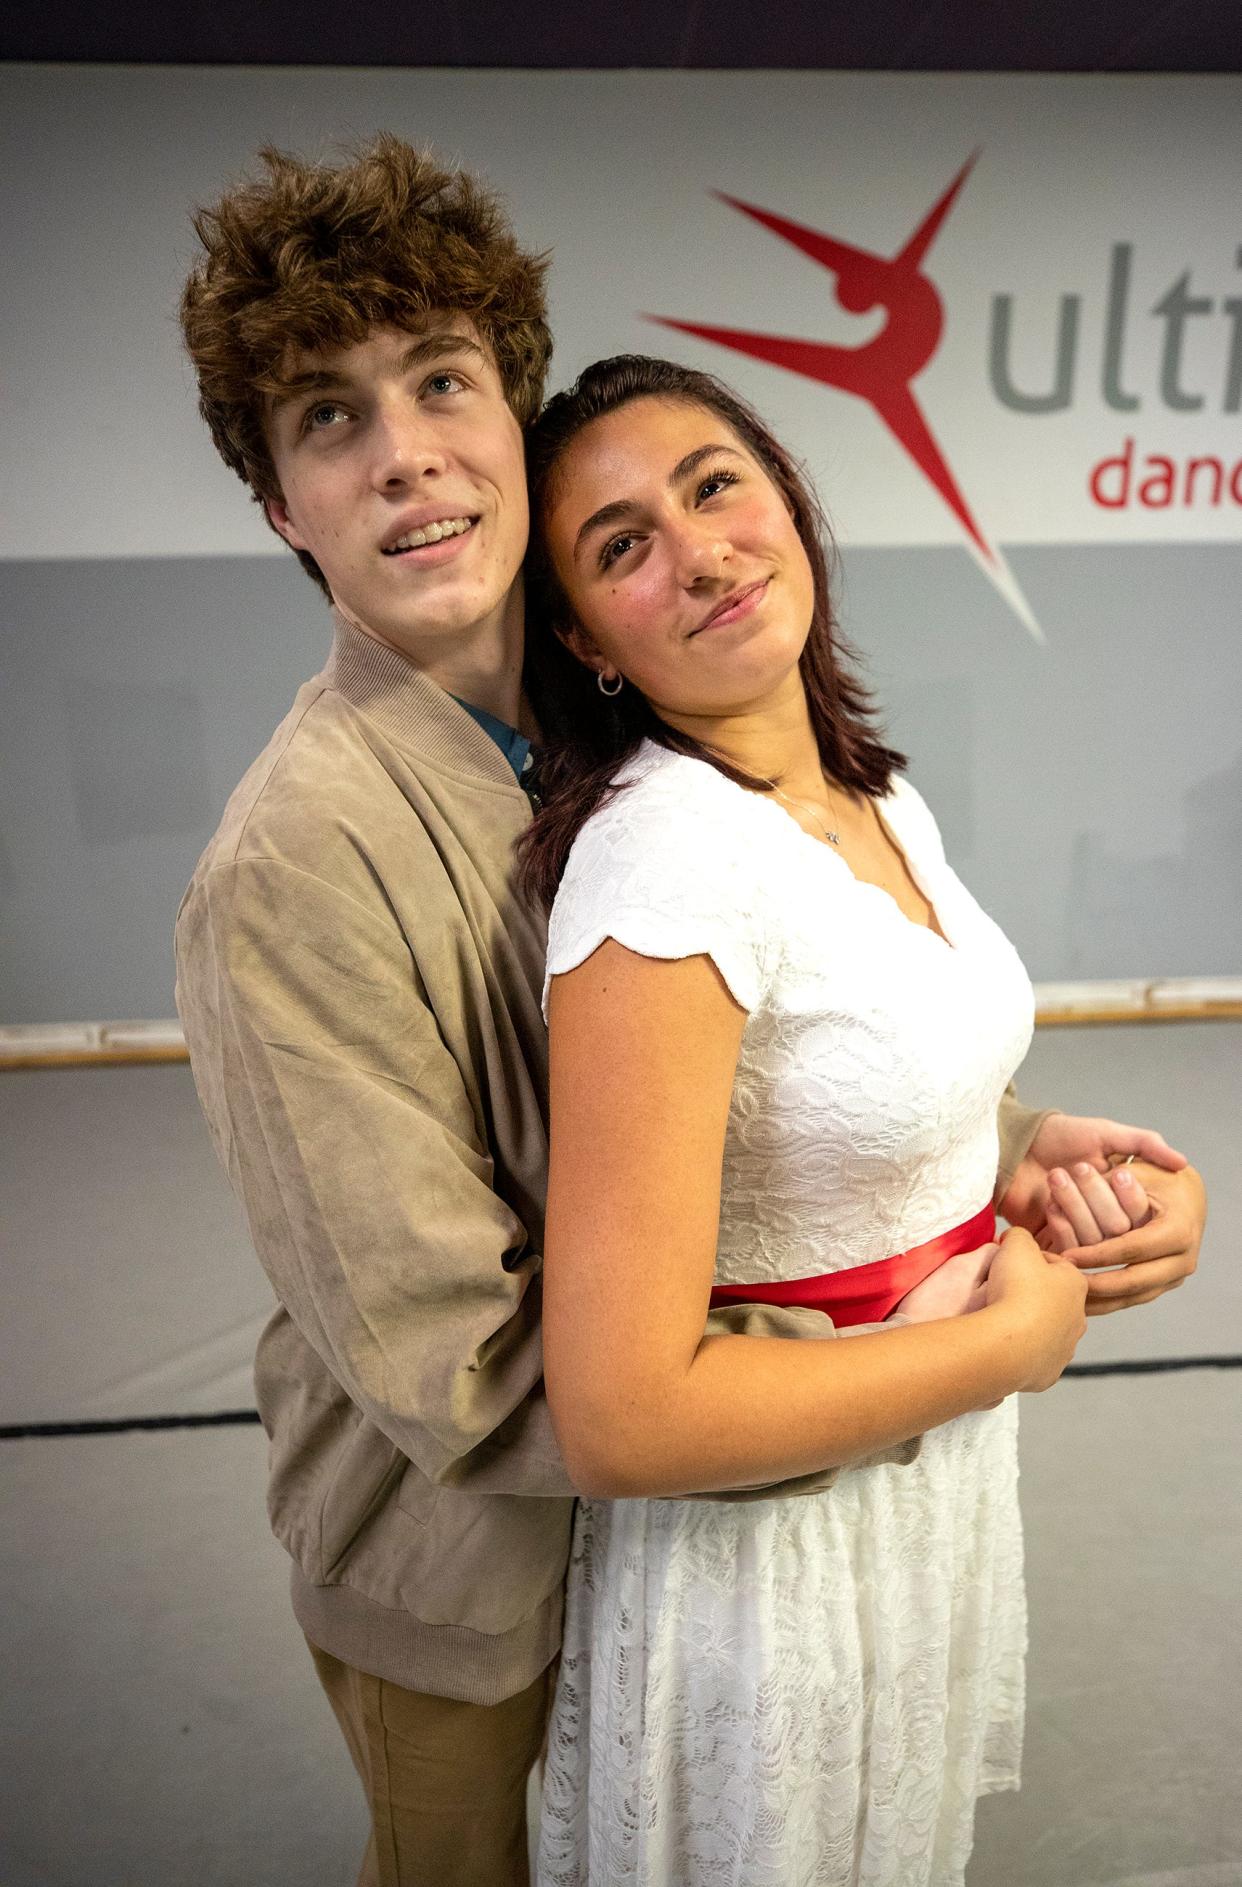 Xander Allen and Isabel Casasnovas-Martino, both 16 and soon-to-be juniors at Harrison School for the Arts, perform the leads in a production of "West Side Story" in Lakeland this weekend. It's the second licensed mainstage show since the theater groups founding in 2010.